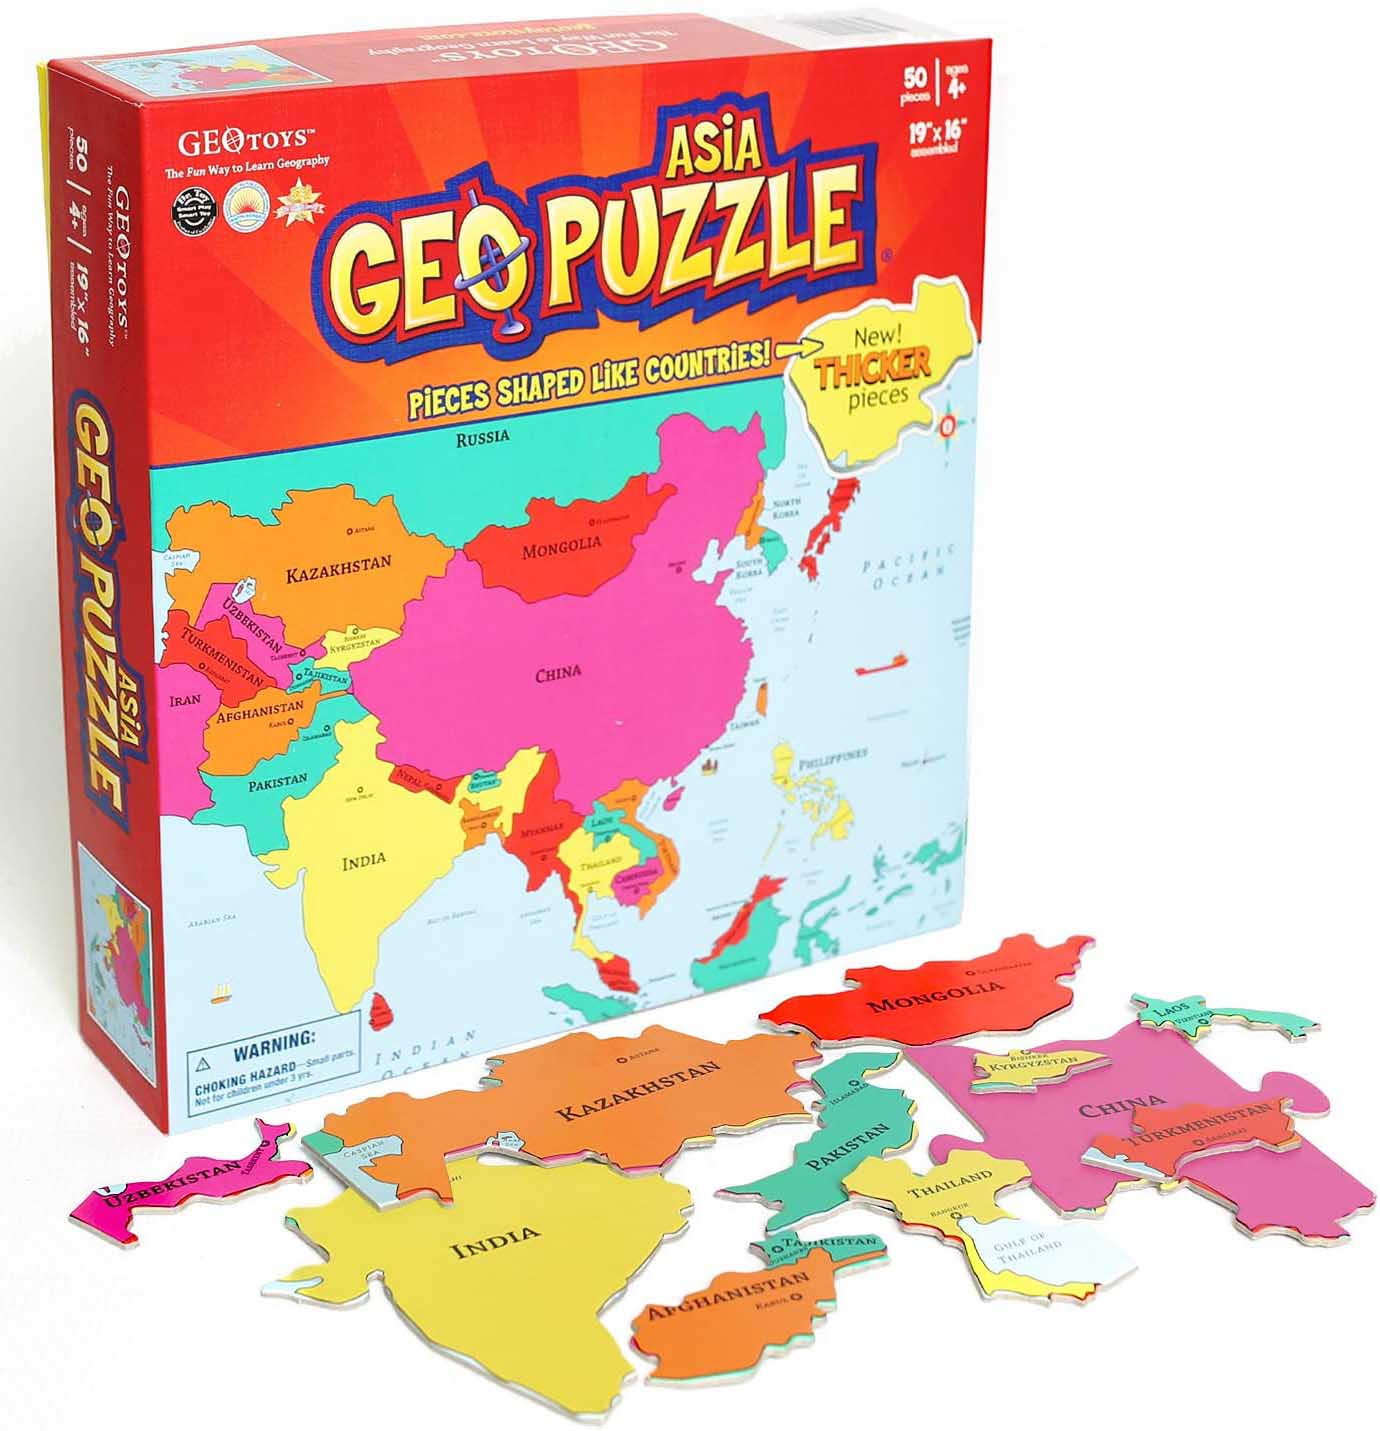 Asia Maps & Geography Jigsaw Puzzle